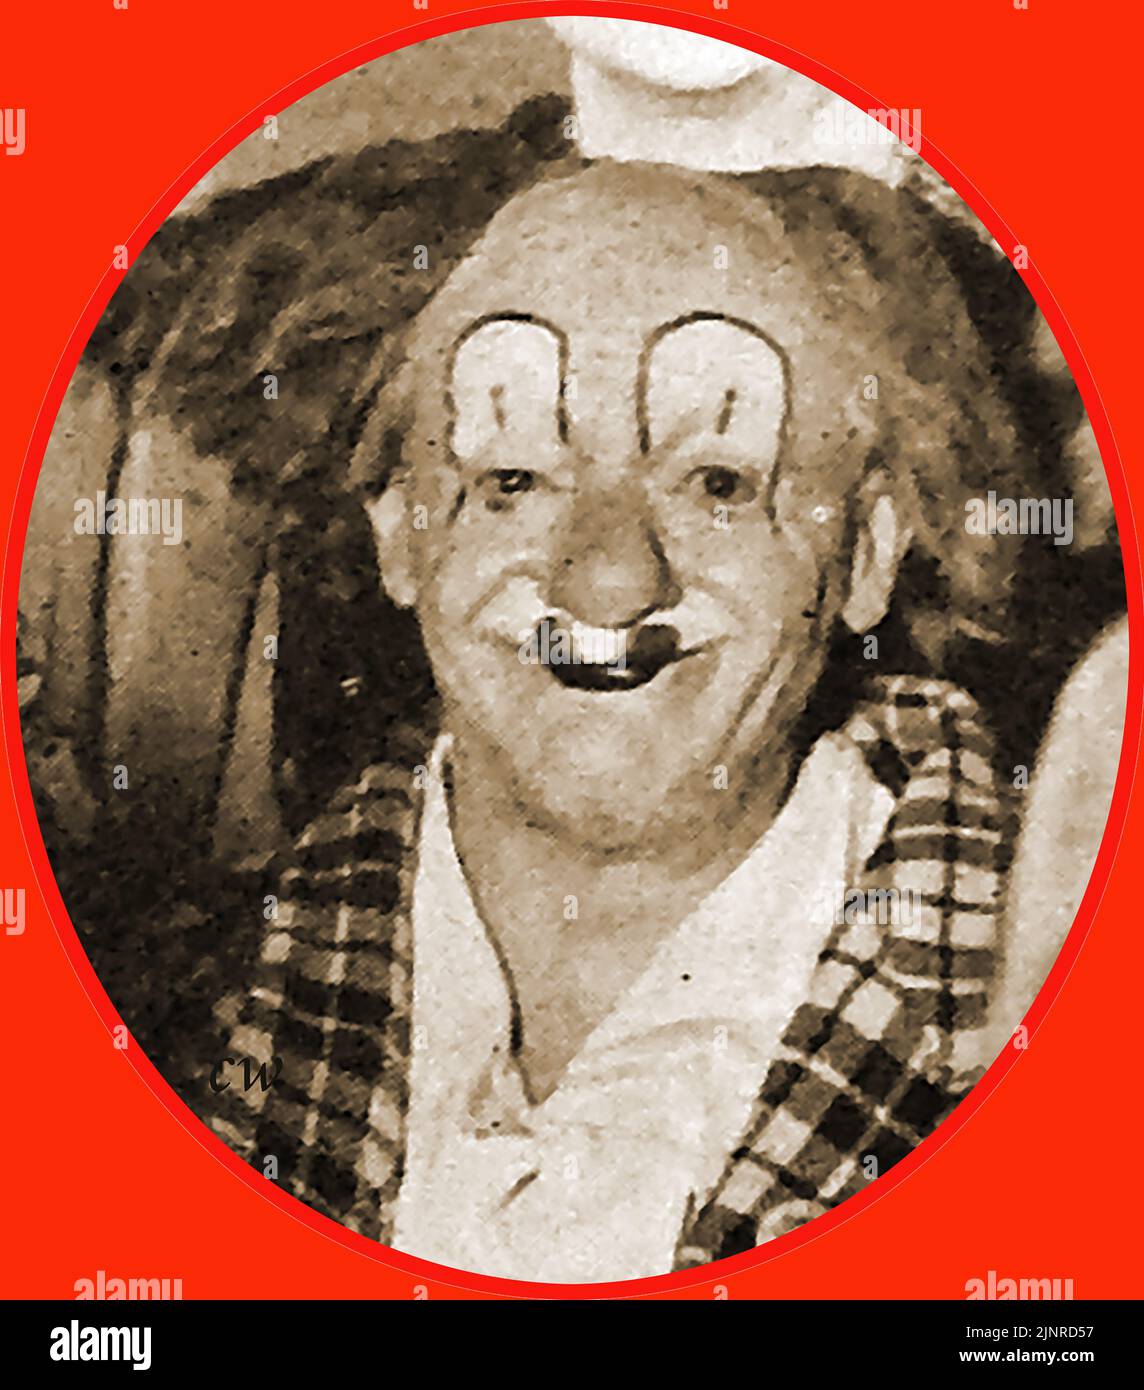 Bertram Mills circus (UK) - A portrait of Coco the Clown, real name Nicolai Poliakoff OBE ( 900 – 25  1974( . He was known in Latvia as Nikolajs Poļakovs and in Russia as Николáй Петрóвич   Полякóв) . He is widely recognised as  the most famous clown in the United Kingdom during  mid-20th century. He appeared in Bertram Mills circus during the 1920's ,30's  & 40's and  also performed at the Blackpool Tower circus and  toured with Robert Brothers circus.  -- Koko klauna portrets, īstais vārds Николáй Петрóвич Stock Photo